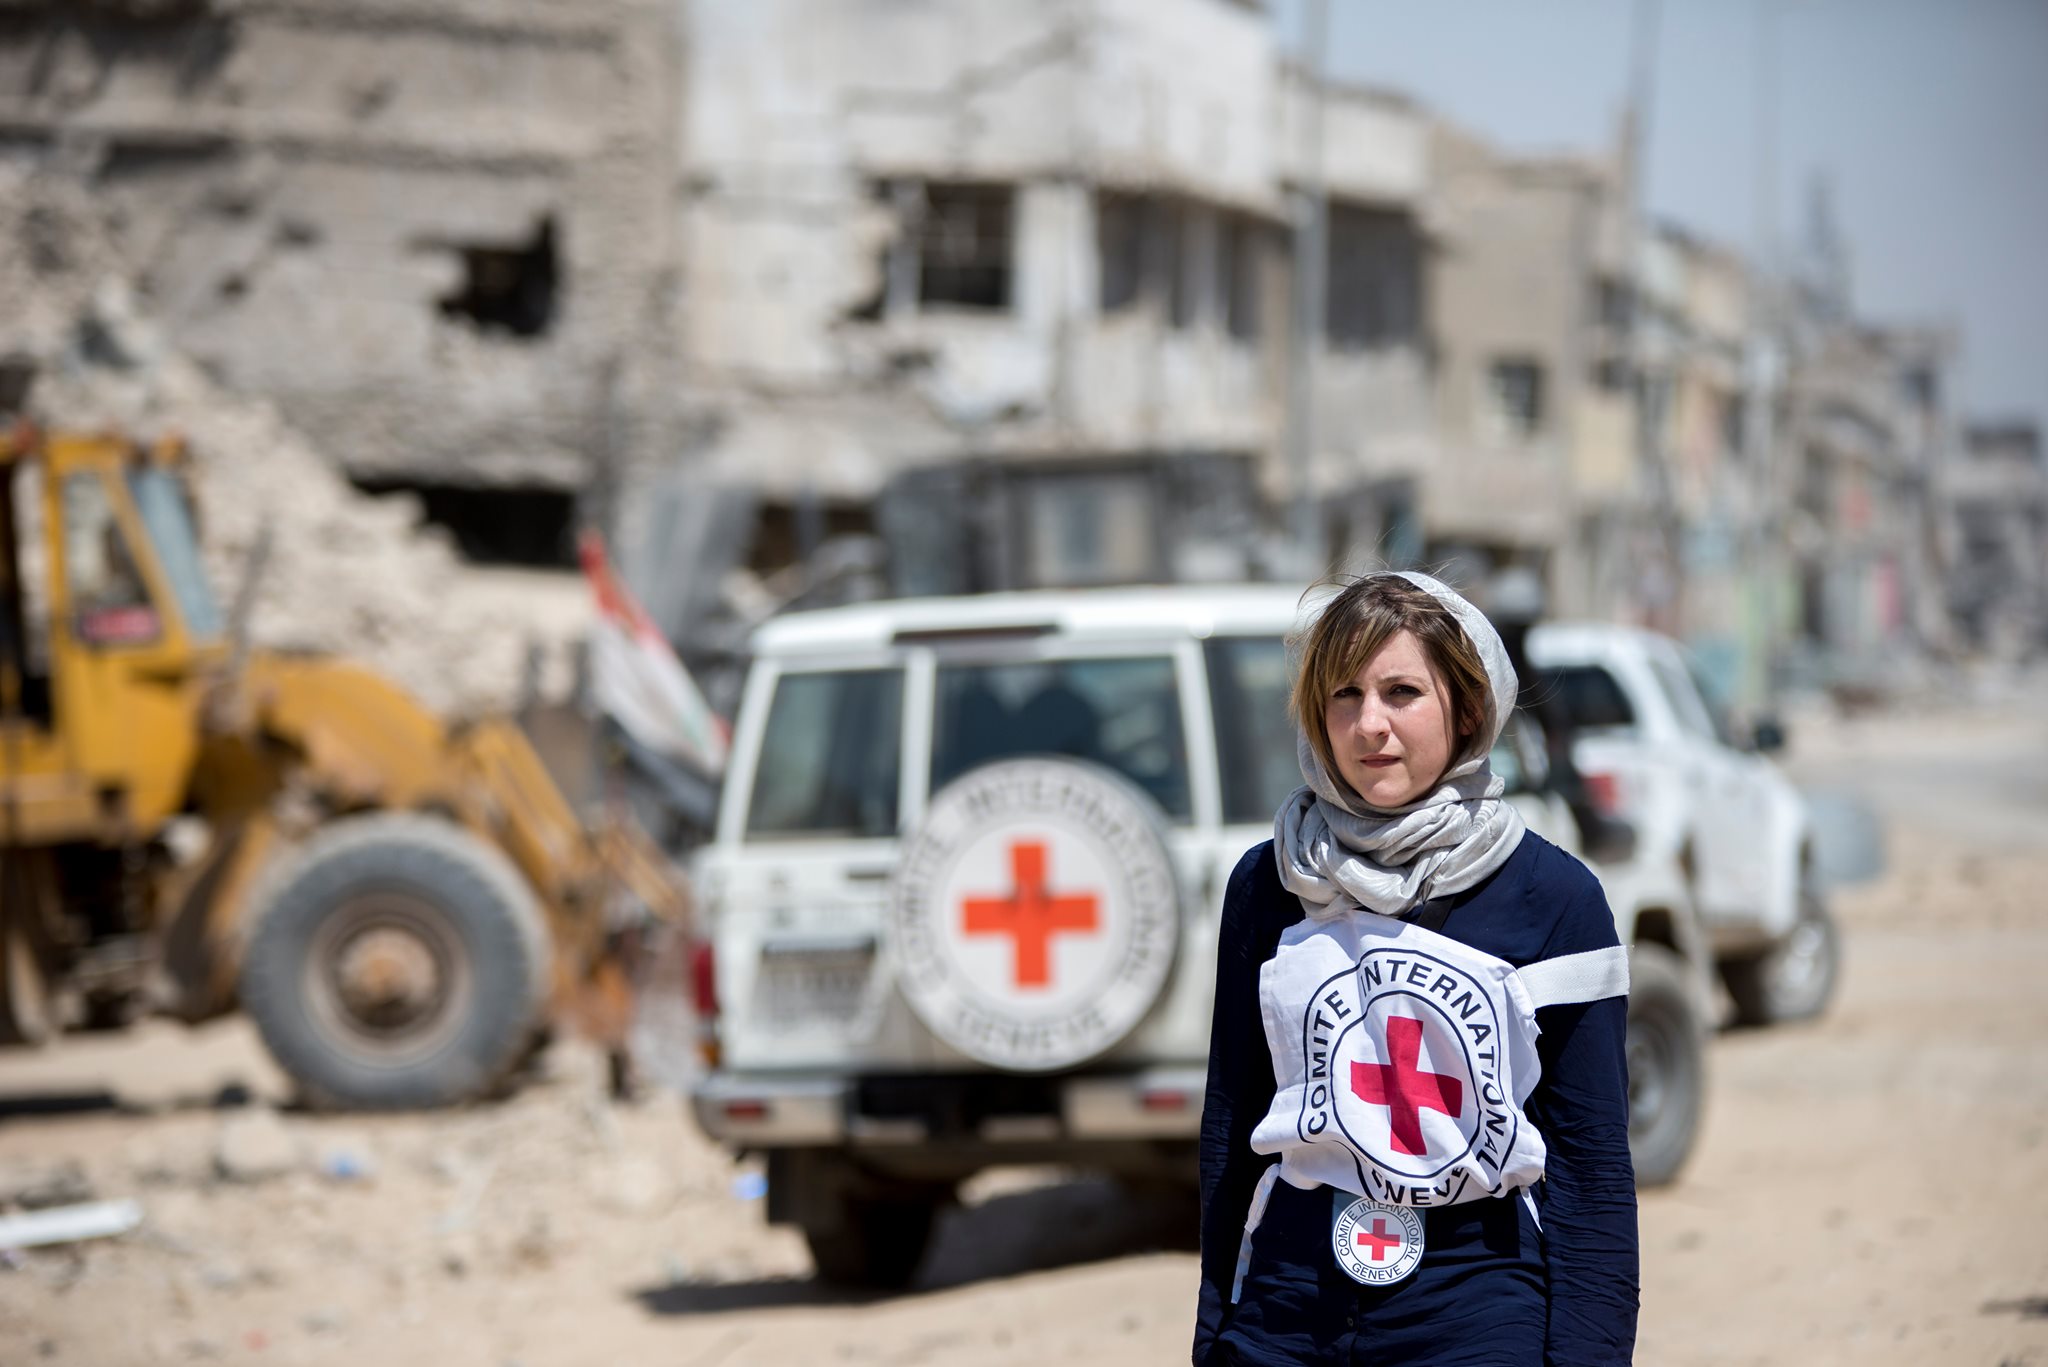 A Red Cross volunteer stands before a Red Cross vehicle in a disaster zone. Photo: Facebook/International Committee of the Red Cross.